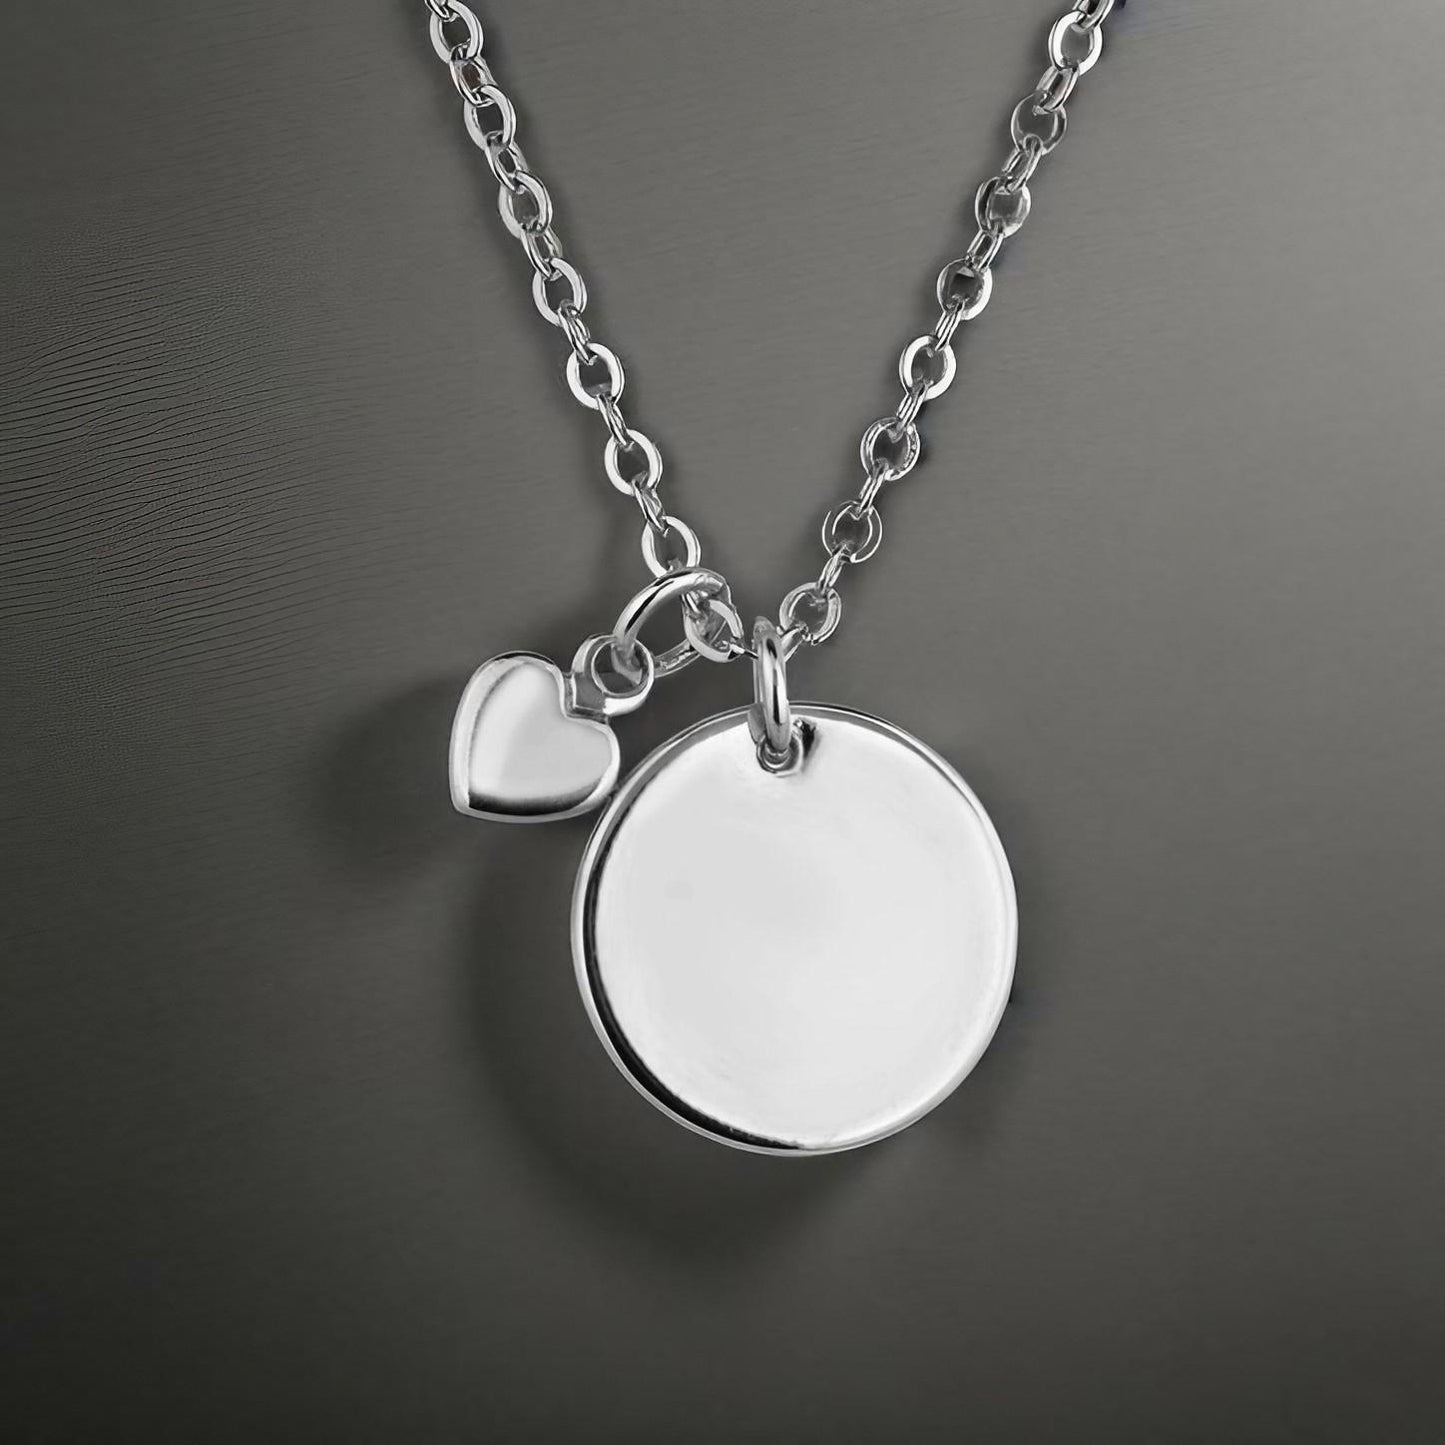 Silver Circle Necklace with Heart Charm